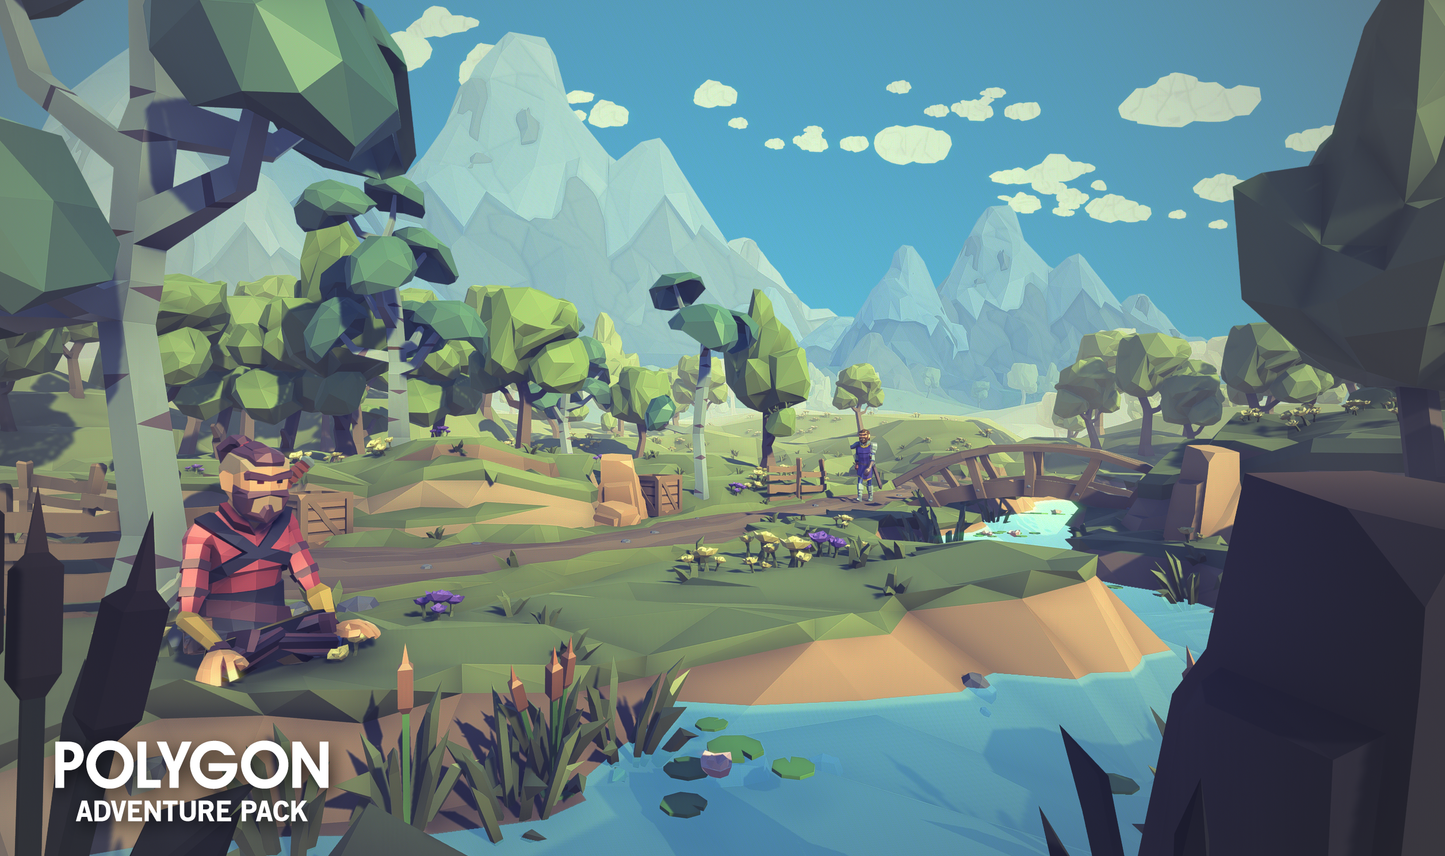 Meditating figure in a low poly 3d asset as part of the POLYGON Adventure Pack